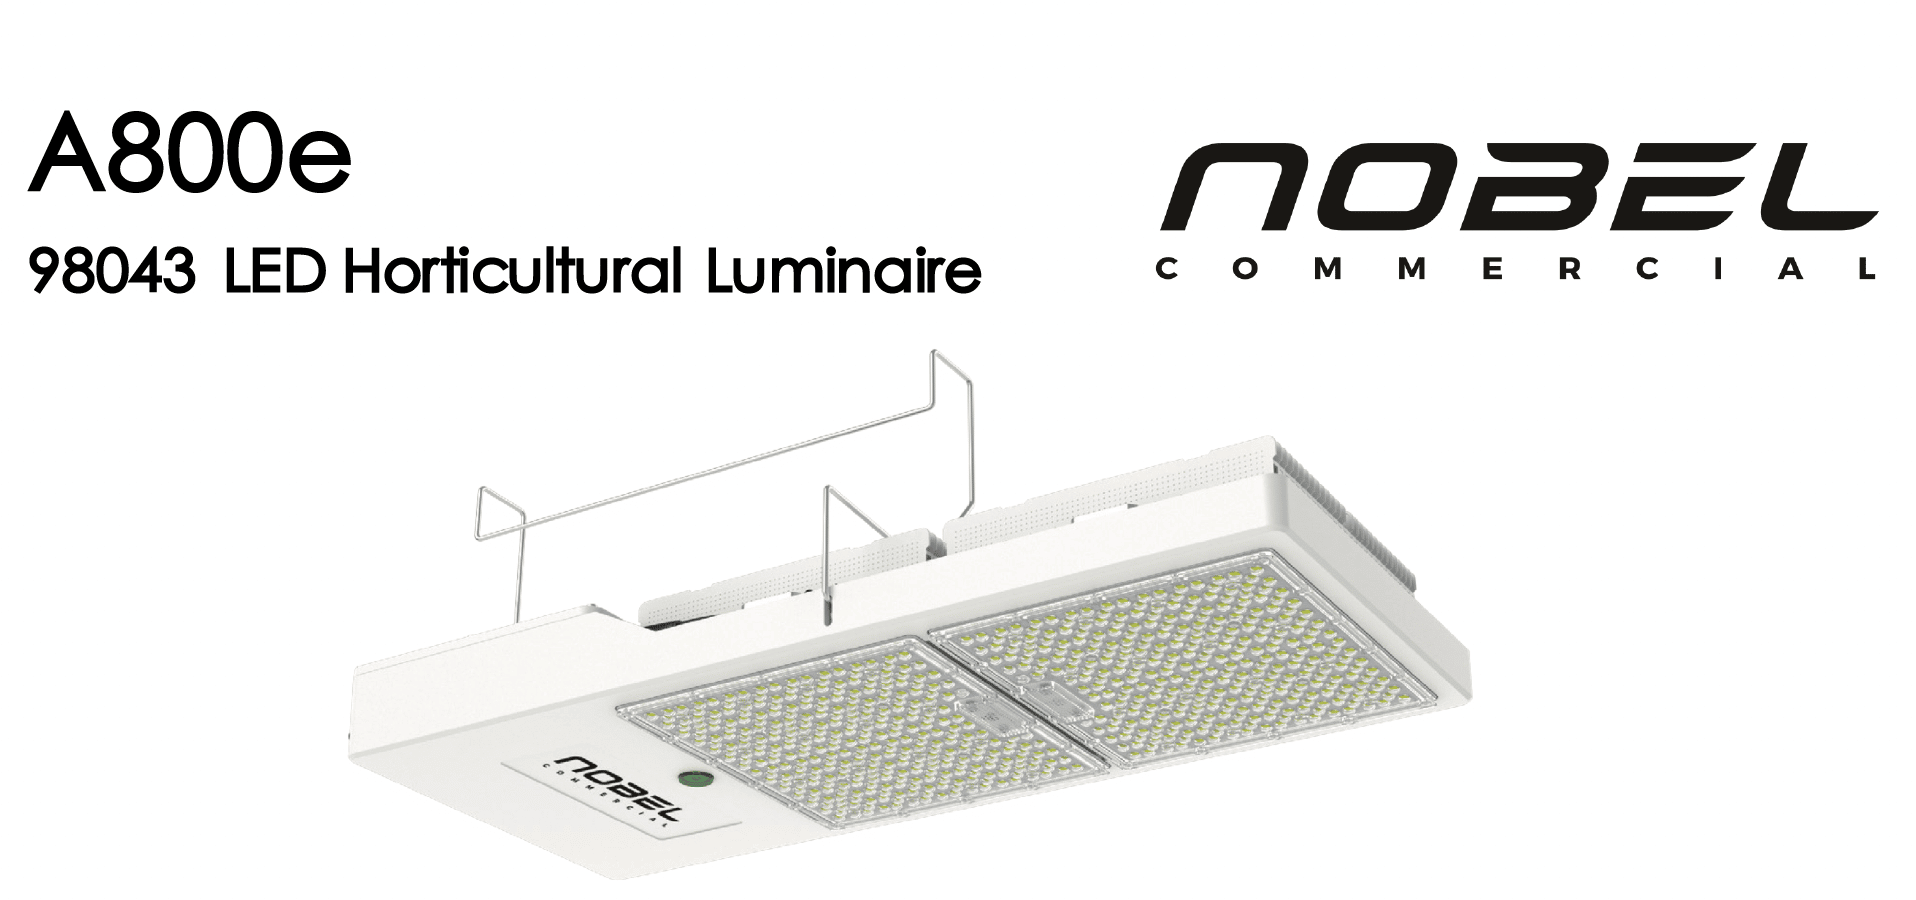 You are currently viewing Illuminating Growth: The Advantages of LED Lights and the Nobel A800E LED Grow Light